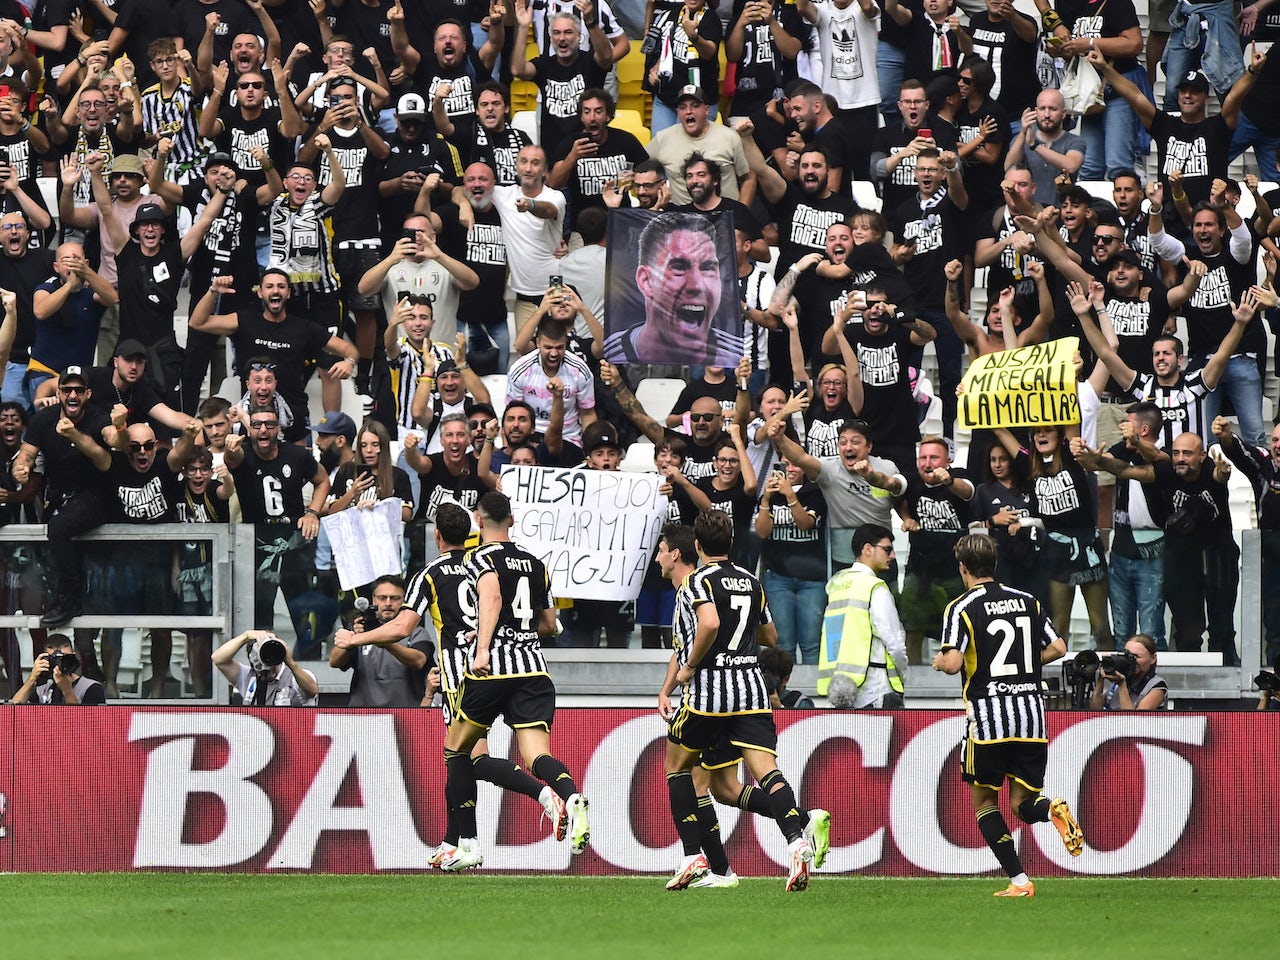 Torino V Juventus Match Preview and Scouting 